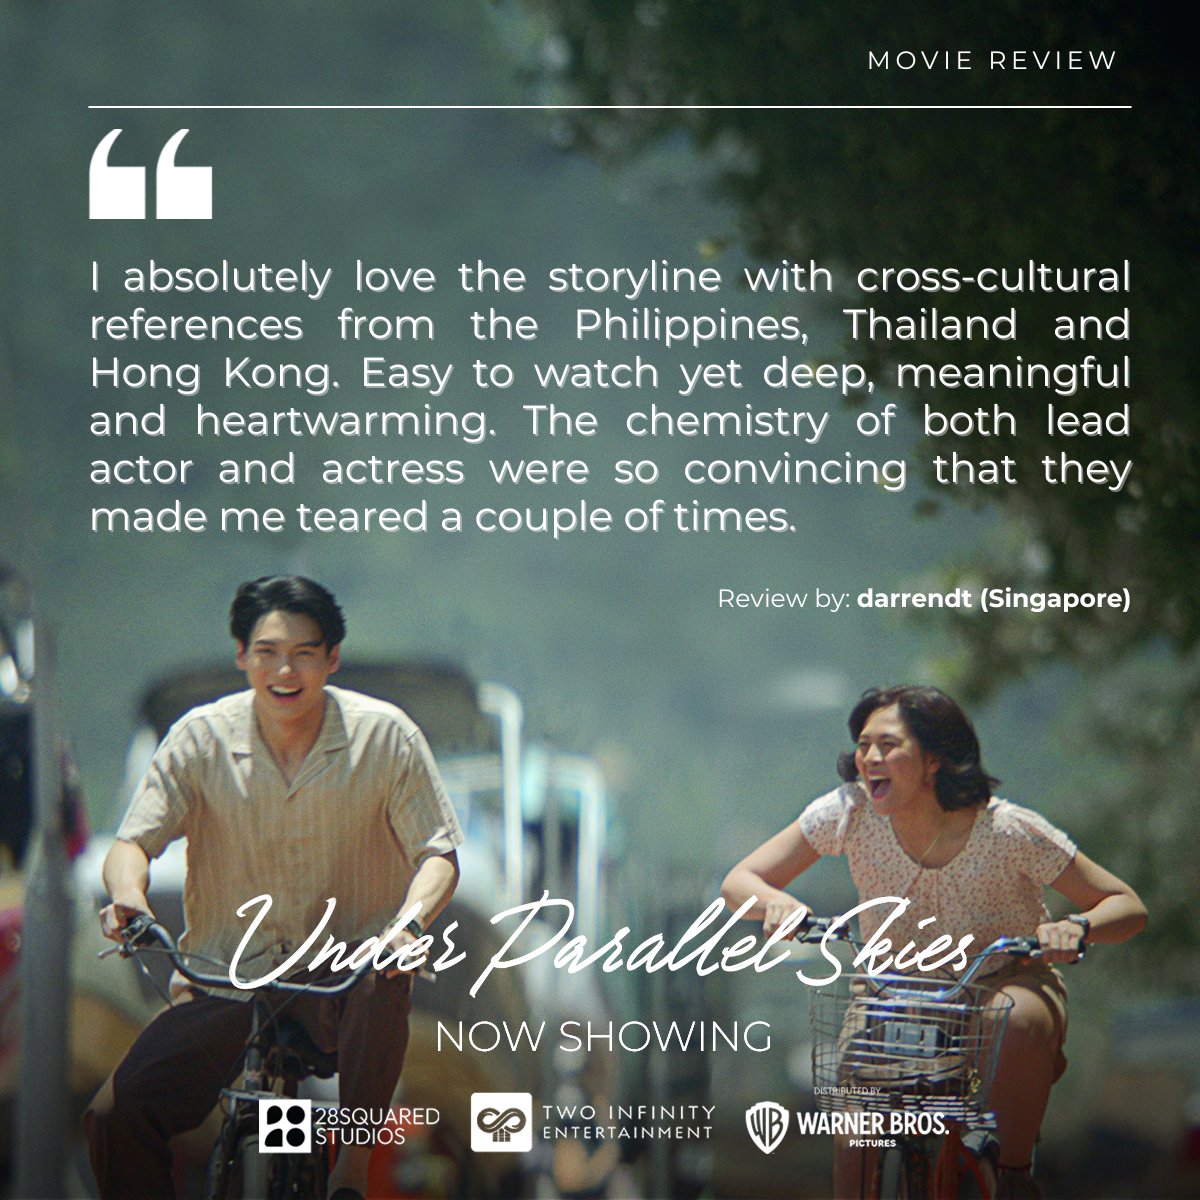 MOVIE REVIEW (Singapore): I absolutely love the storyline with cross-cultural references from the Philippines, Thailand and Hong Kong. Catch #WinMetawin and #JanellaSalvador in one of the most anticipated film collaborations of the year in Asia, #UnderParallelSkies, at cinemas